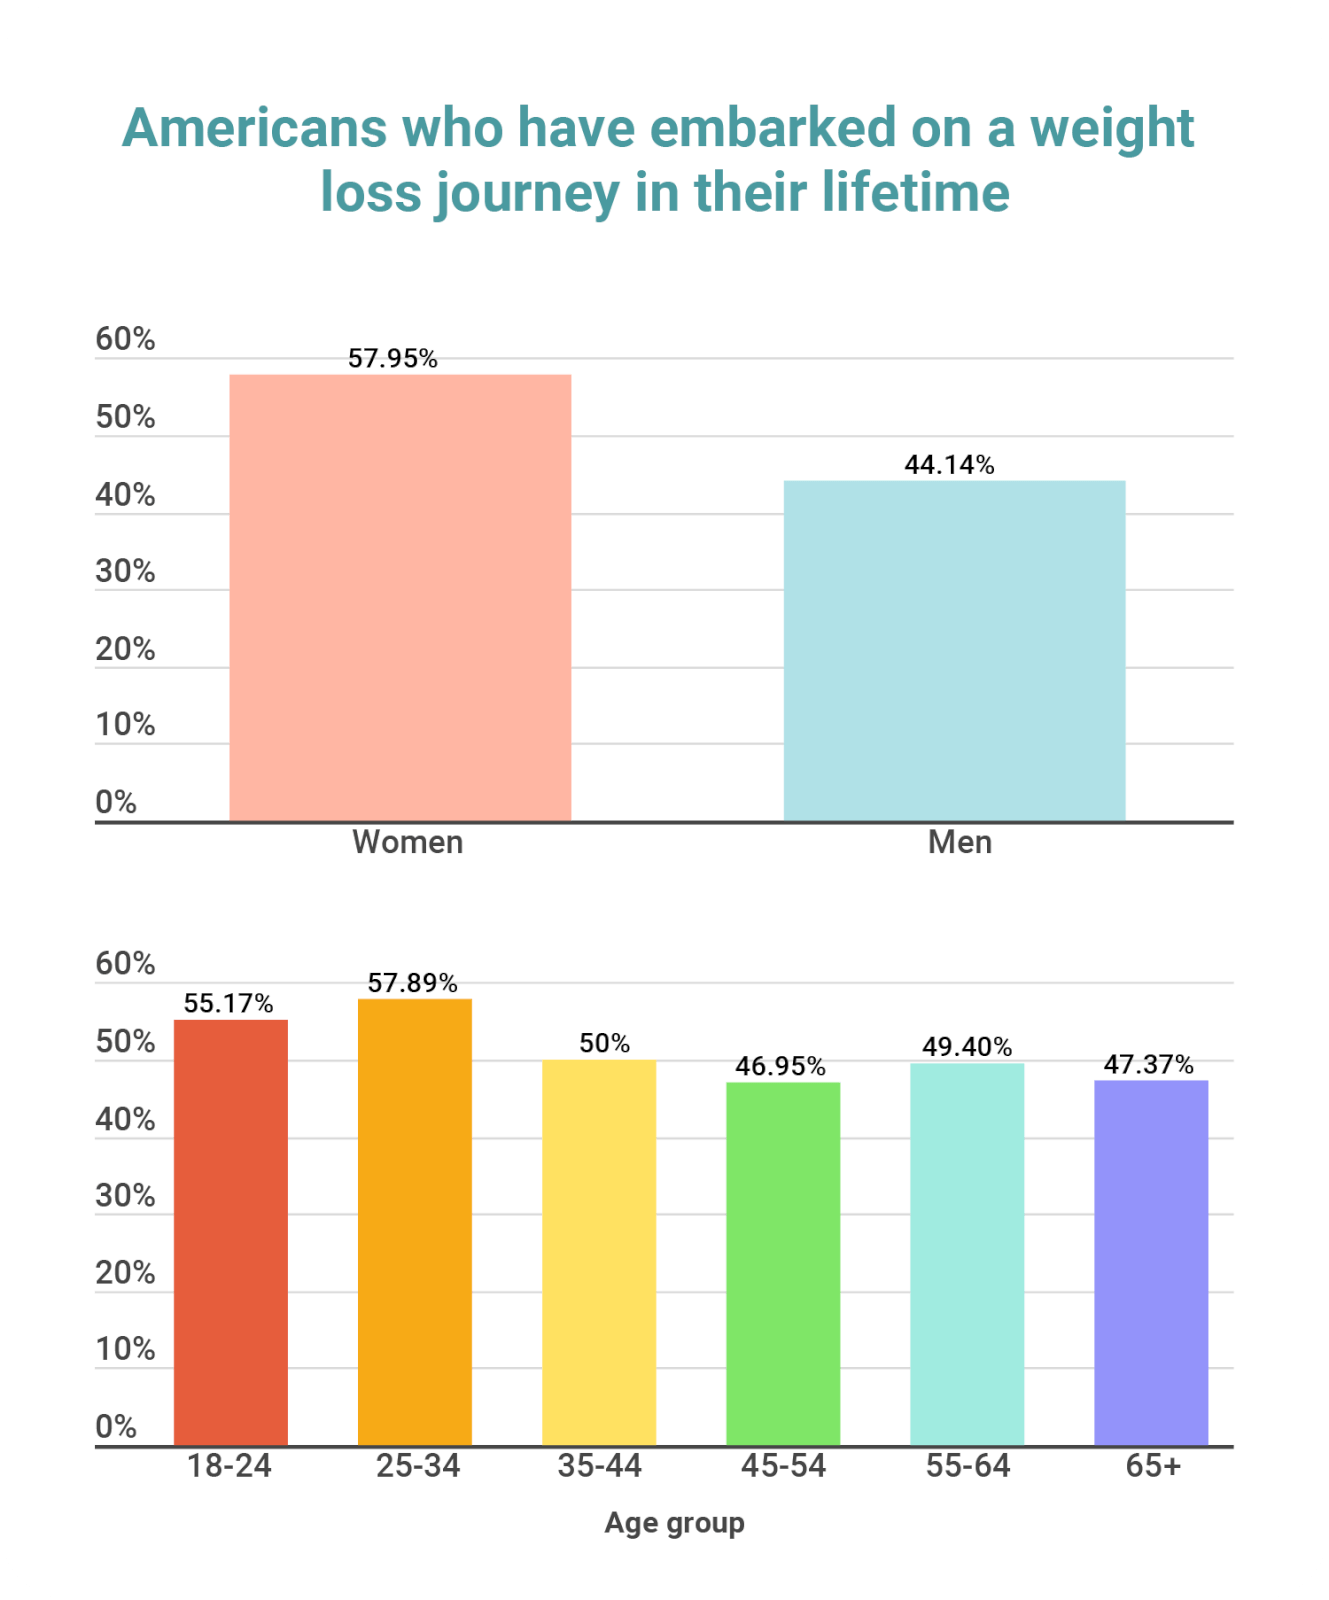 A bar chart showing the intention to lose weight from American survey respondents